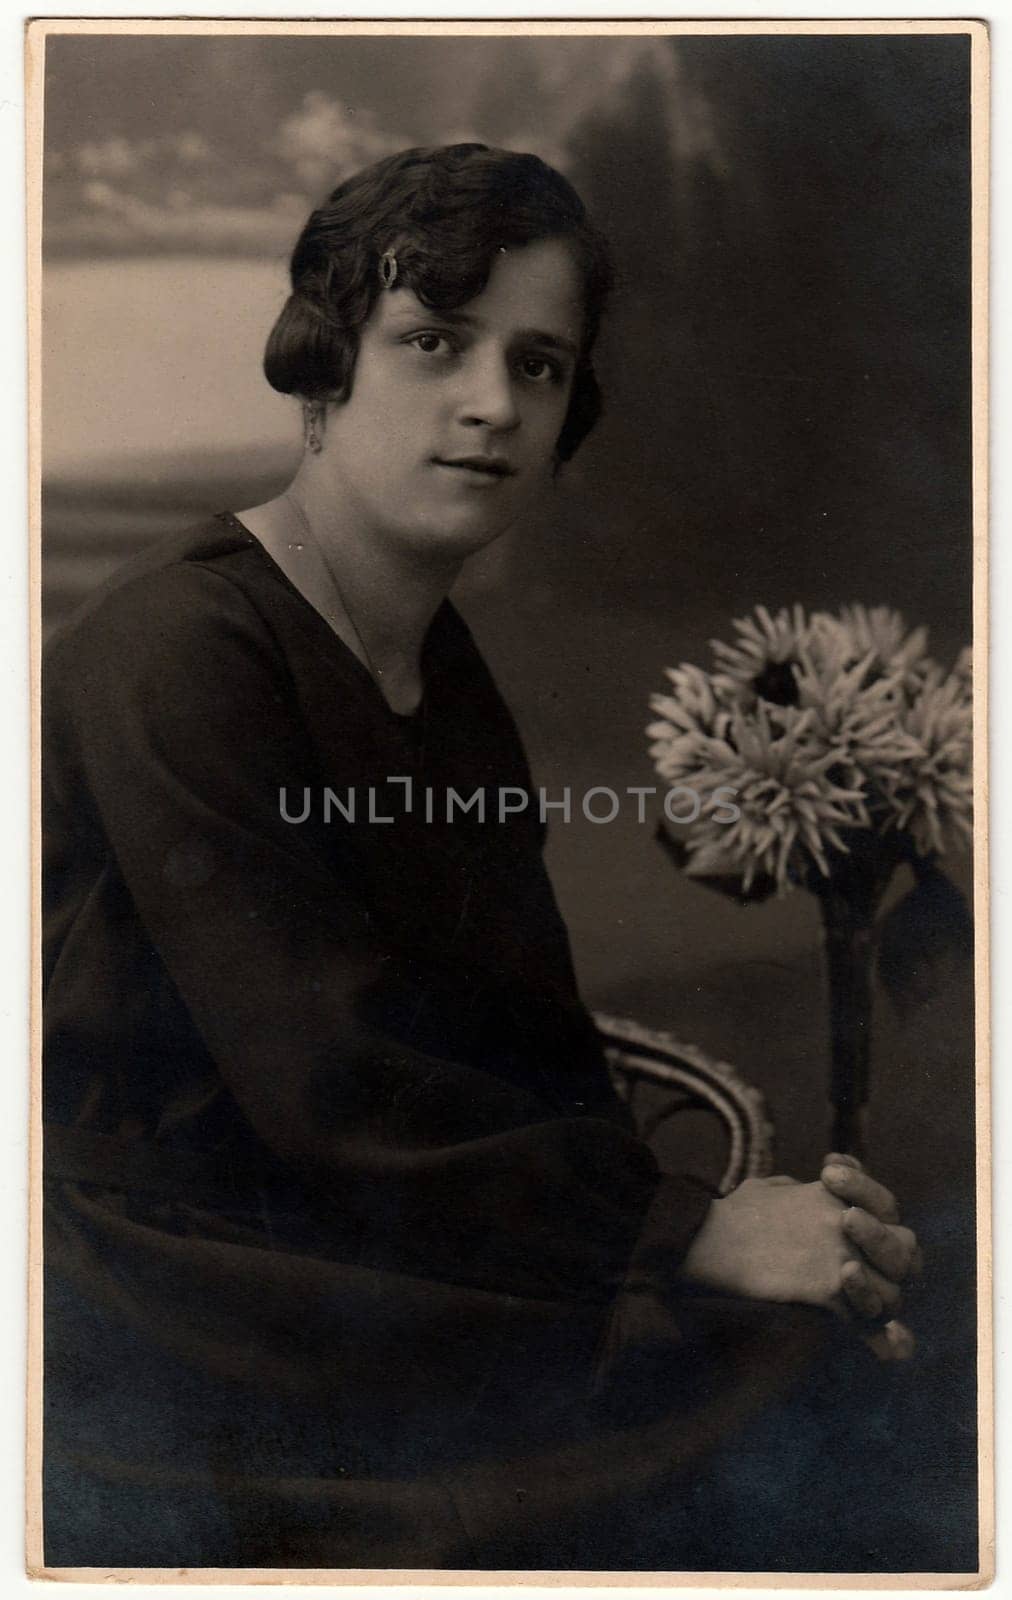 HEJNICE (HAINDORF), THE CZECHOSLOVAK REPUBLIC - CIRCA 1930s: Vintage photo shows a woman with bouquet poses in a photography studio. Photo with sepia tint. Black white studio portrait.